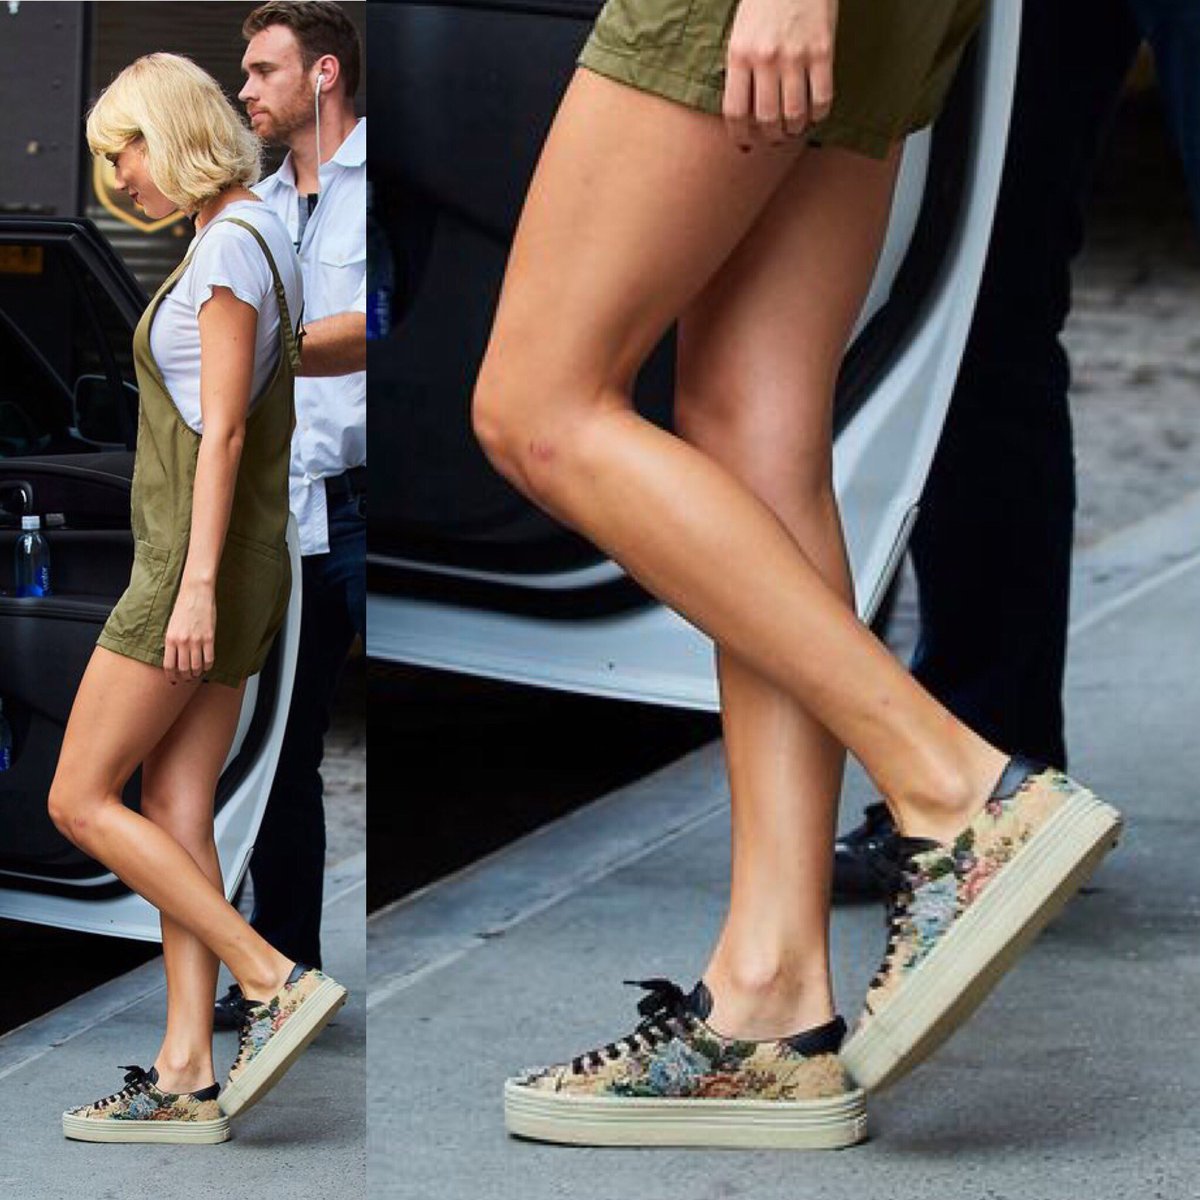 Taylor Swift Polls on Twitter "which shoes?! 